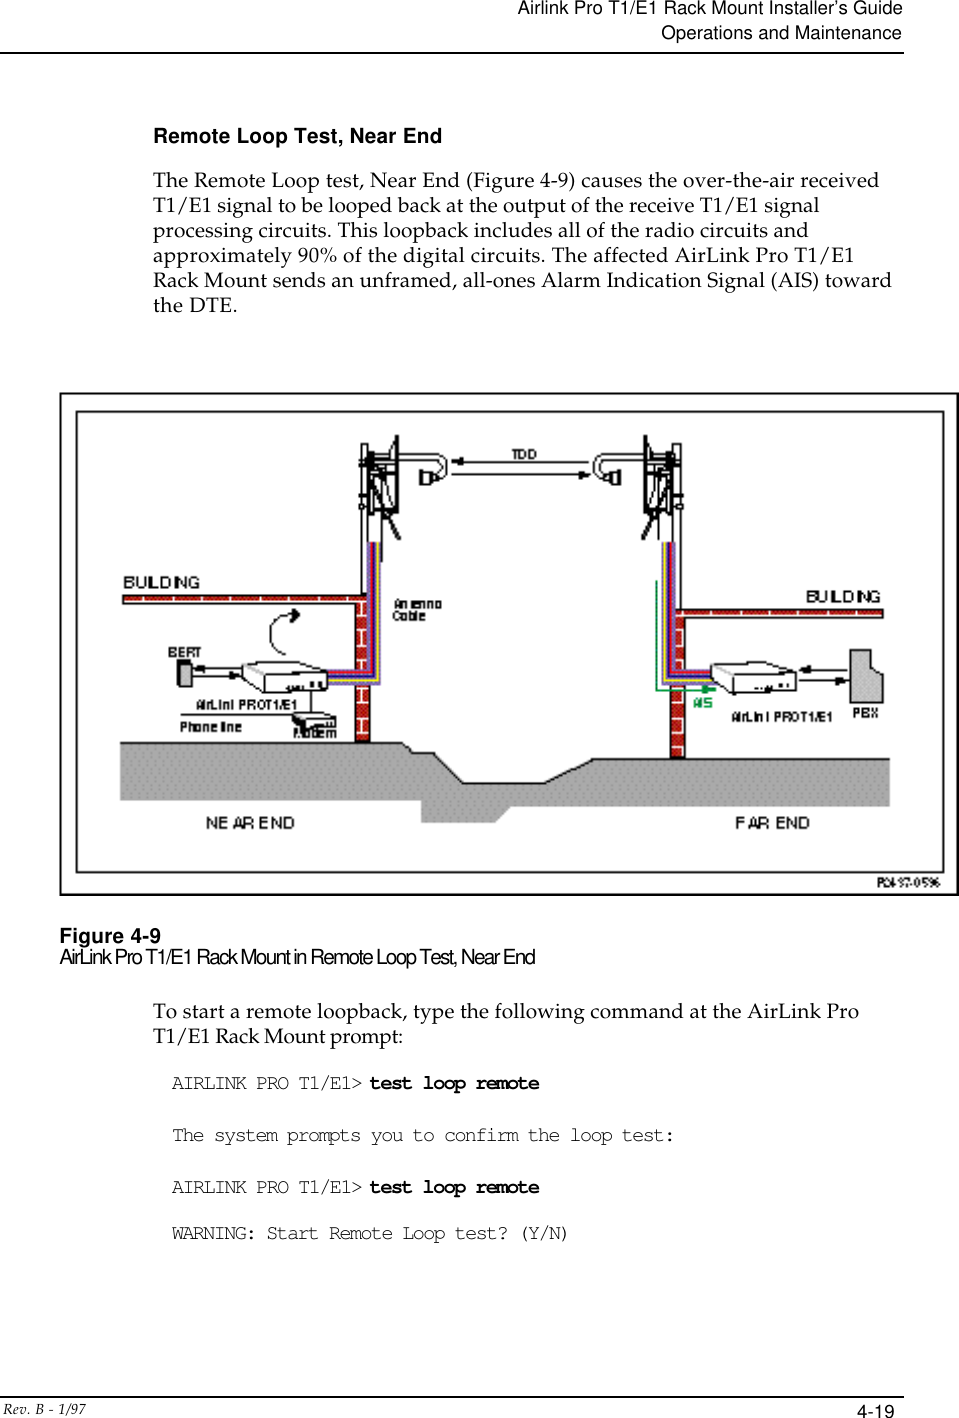 Airlink Pro T1/E1 Rack Mount Installer’s GuideOperations and MaintenanceRev. B - 1/97 4-19Remote Loop Test, Near EndThe Remote Loop test, Near End (Figure 4-9) causes the over-the-air receivedT1/E1 signal to be looped back at the output of the receive T1/E1 signalprocessing circuits. This loopback includes all of the radio circuits andapproximately 90% of the digital circuits. The affected AirLink Pro T1/E1Rack Mount sends an unframed, all-ones Alarm Indication Signal (AIS) towardthe DTE.Figure 4-9AirLink Pro T1/E1 Rack Mount in Remote Loop Test, Near EndTo start a remote loopback, type the following command at the AirLink ProT1/E1 Rack Mount prompt:AIRLINK PRO T1/E1&gt; test loop remoteThe system prompts you to confirm the loop test:AIRLINK PRO T1/E1&gt; test loop remoteWARNING: Start Remote Loop test? (Y/N)